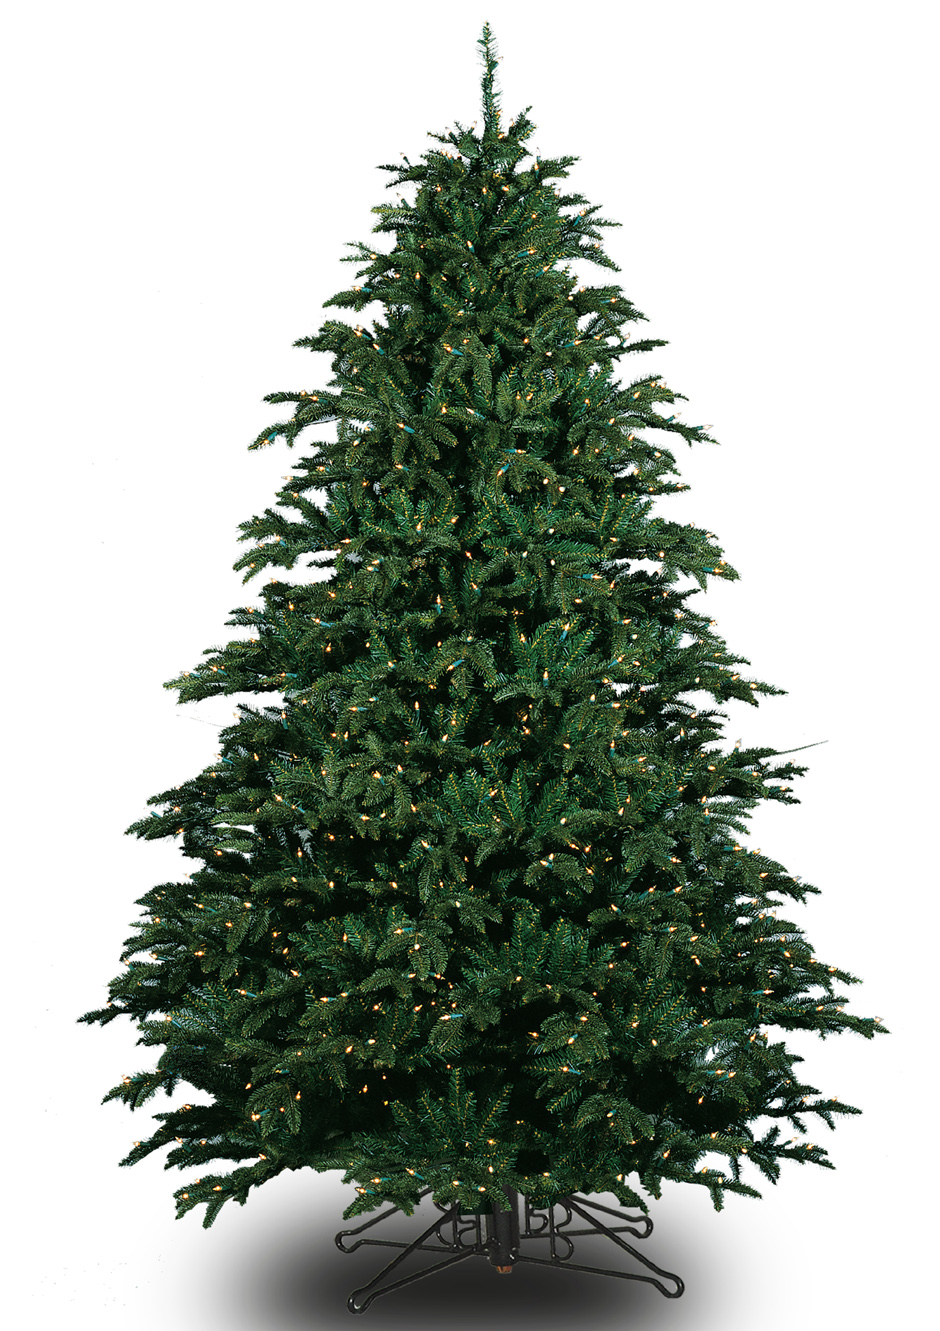 Alaskan Deluxe Christmas Tree - Warm White LED Glow Lights - One-Plug Power Supply - 12ft Tall